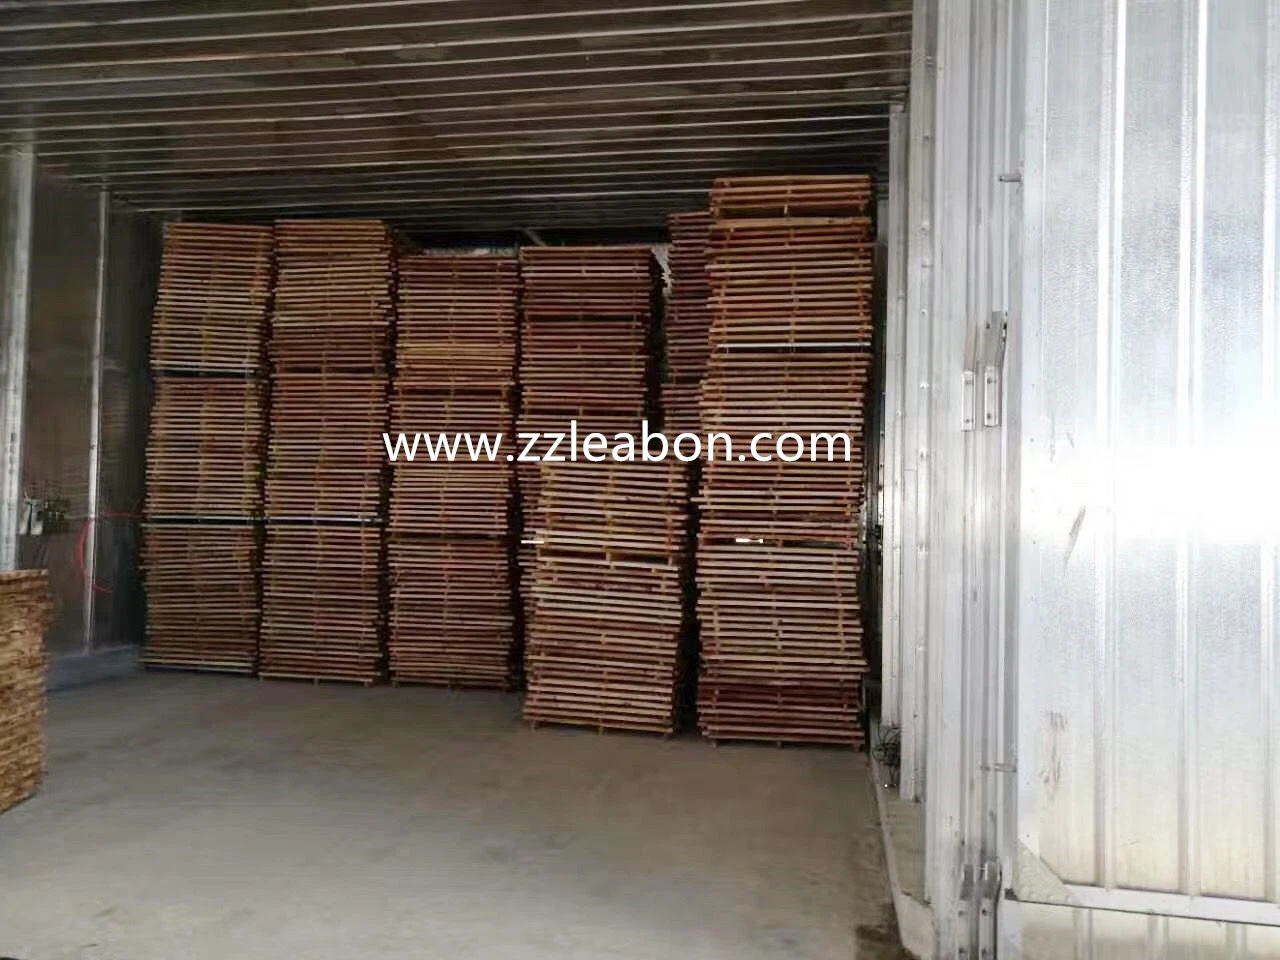 Drying Equipment Forestry Cones Feed Wood Drying Box for Sale